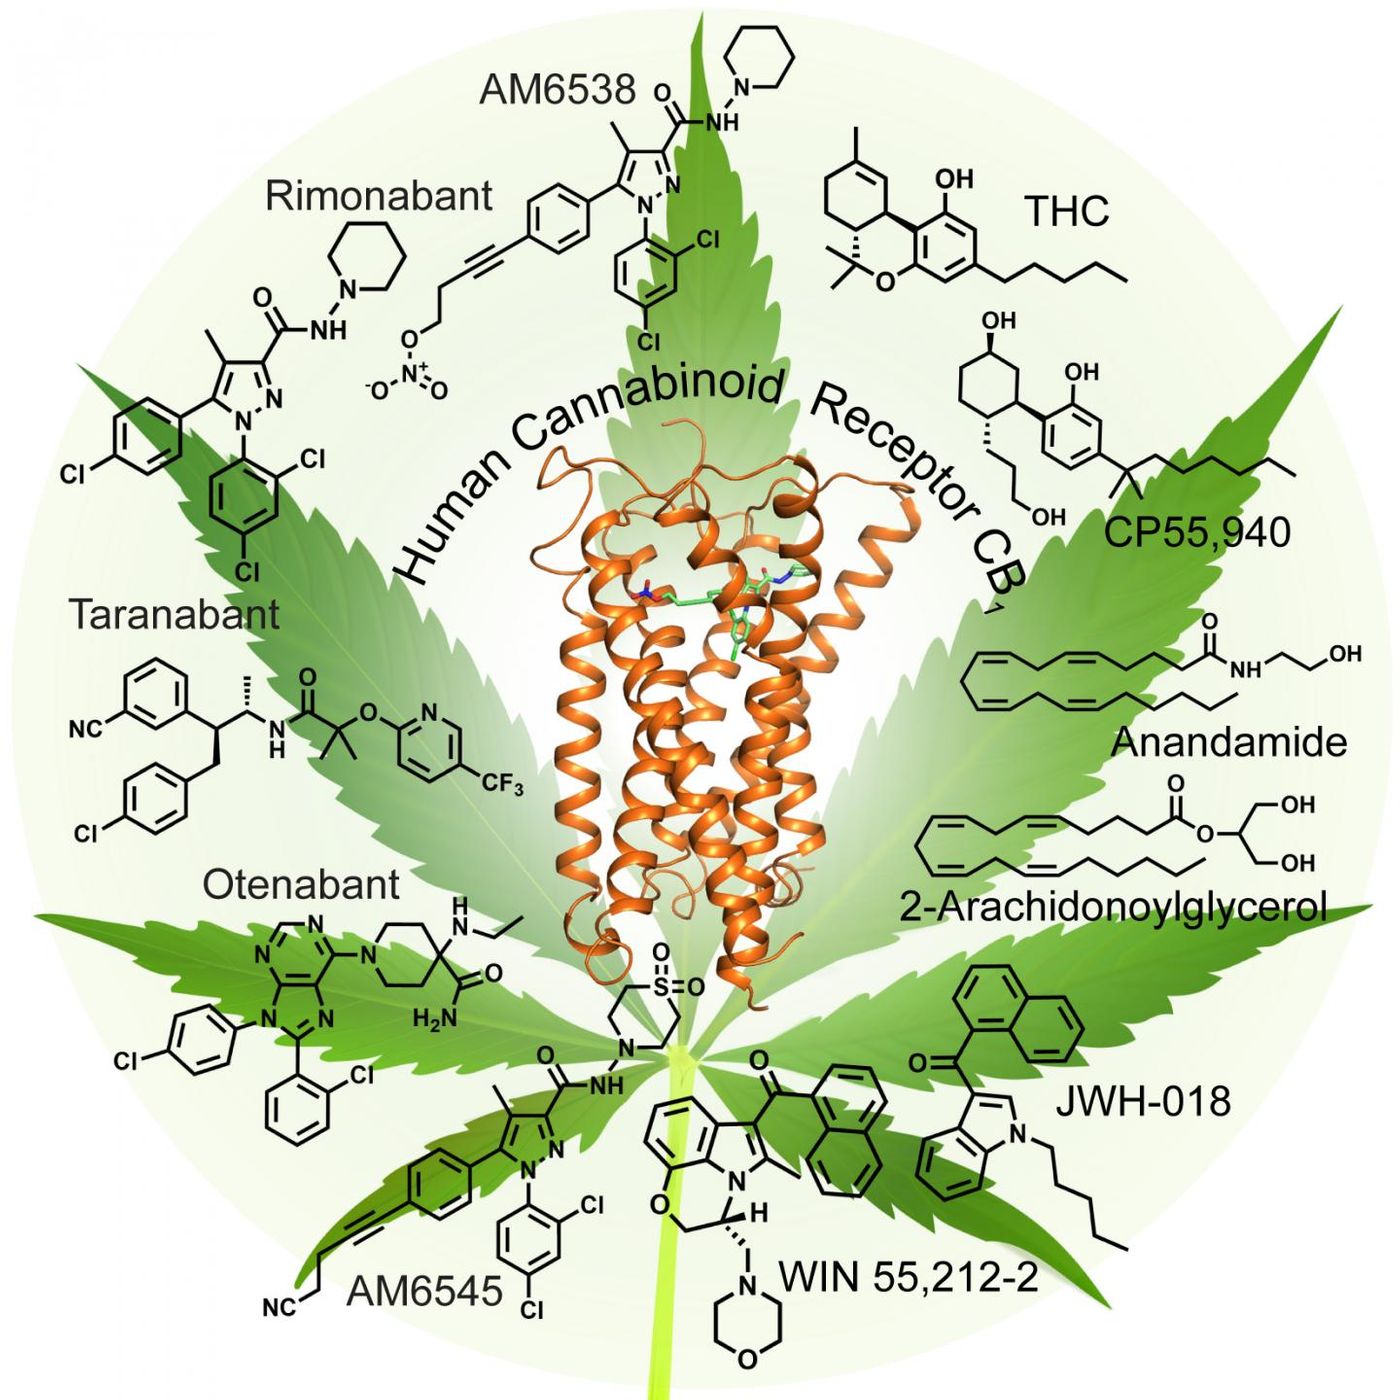 A model of the CB1 receptor shows the structure of the receptor in green, along with the stabilizing molecule AM6538 in the central binding pocket. The researchers used this model to examine how different cannabinoid molecules bind to and activate the receptor. / Credit: Yekaterina Kadyshevskaya, Stevens Laboratory, USC